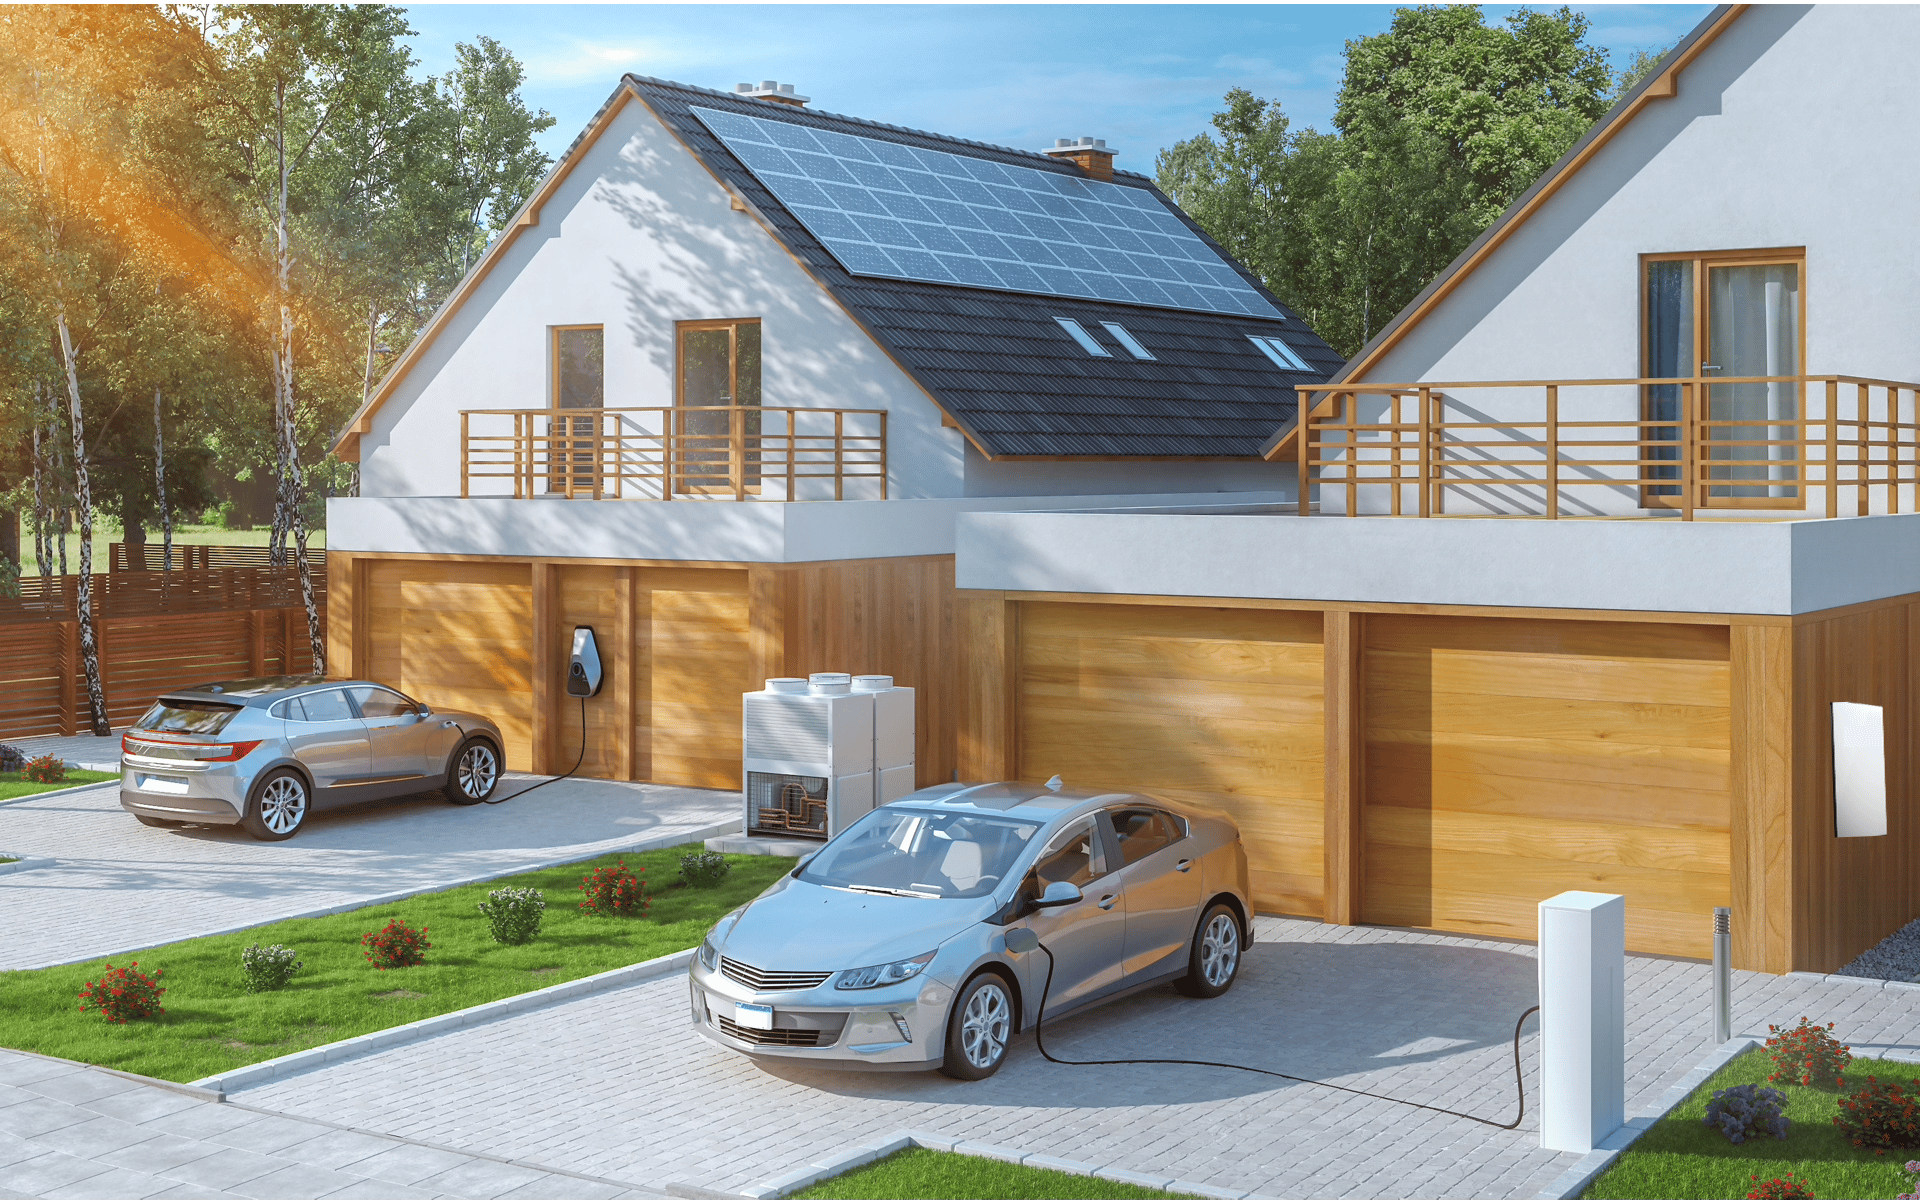 Energy Storage Batteries Can Power Your Home and Future